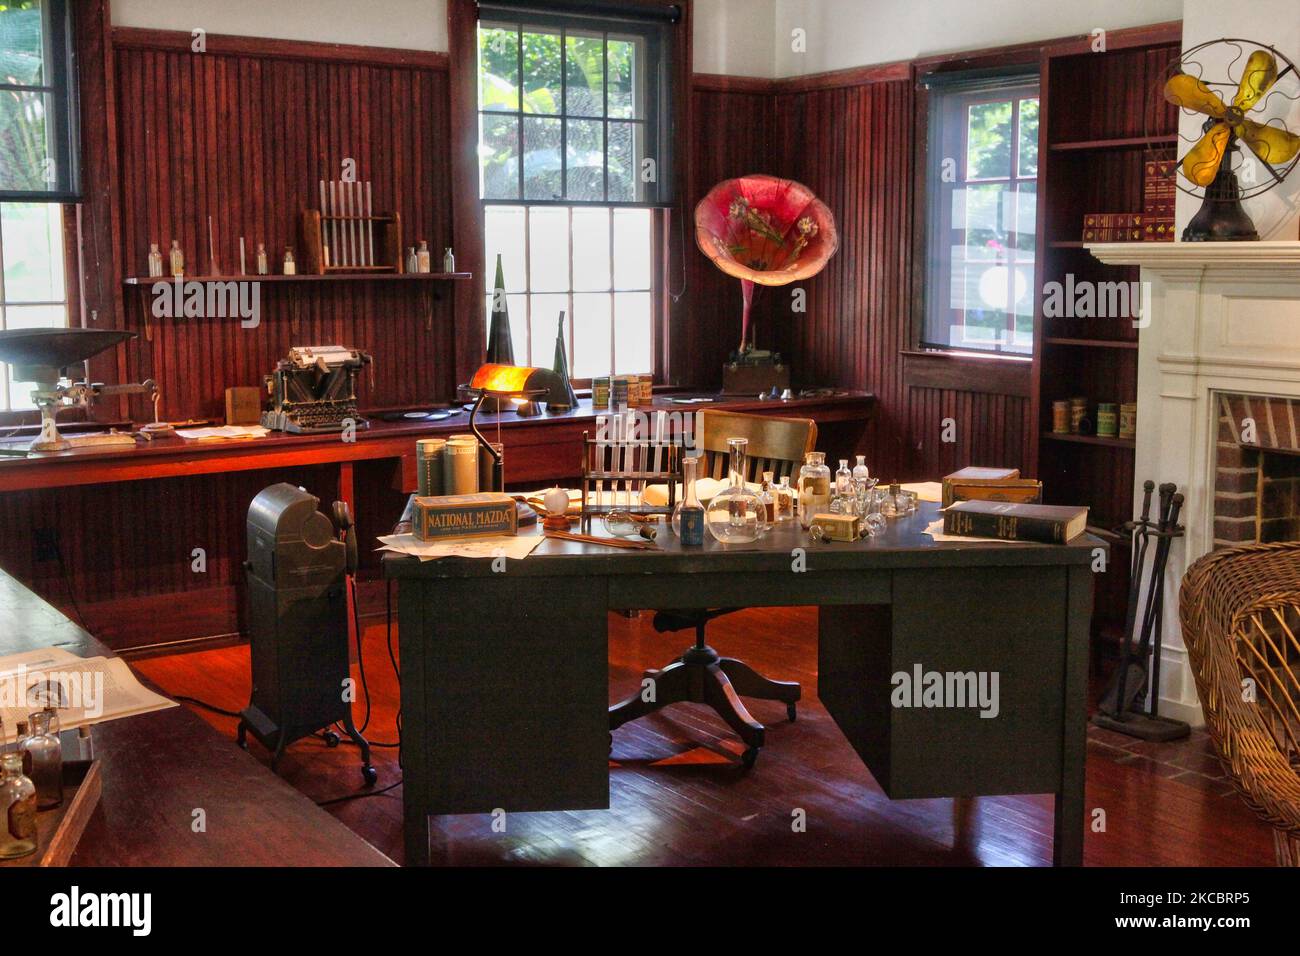 Thomas Edison's Little Office located by his Moonlight Garden at the Thomas Edison and Henry Ford Winter Estates in Fort Myers, Florida, USA. The Edison and Ford Winter Estates contain a historical museum and 21 acre botanical garden on the adjacent sites of the winter homes of Thomas Edison and Henry Ford beside the Caloosahatchee River in southwestern Florida. (Photo by Creative Touch Imaging Ltd./NurPhoto) Stock Photo